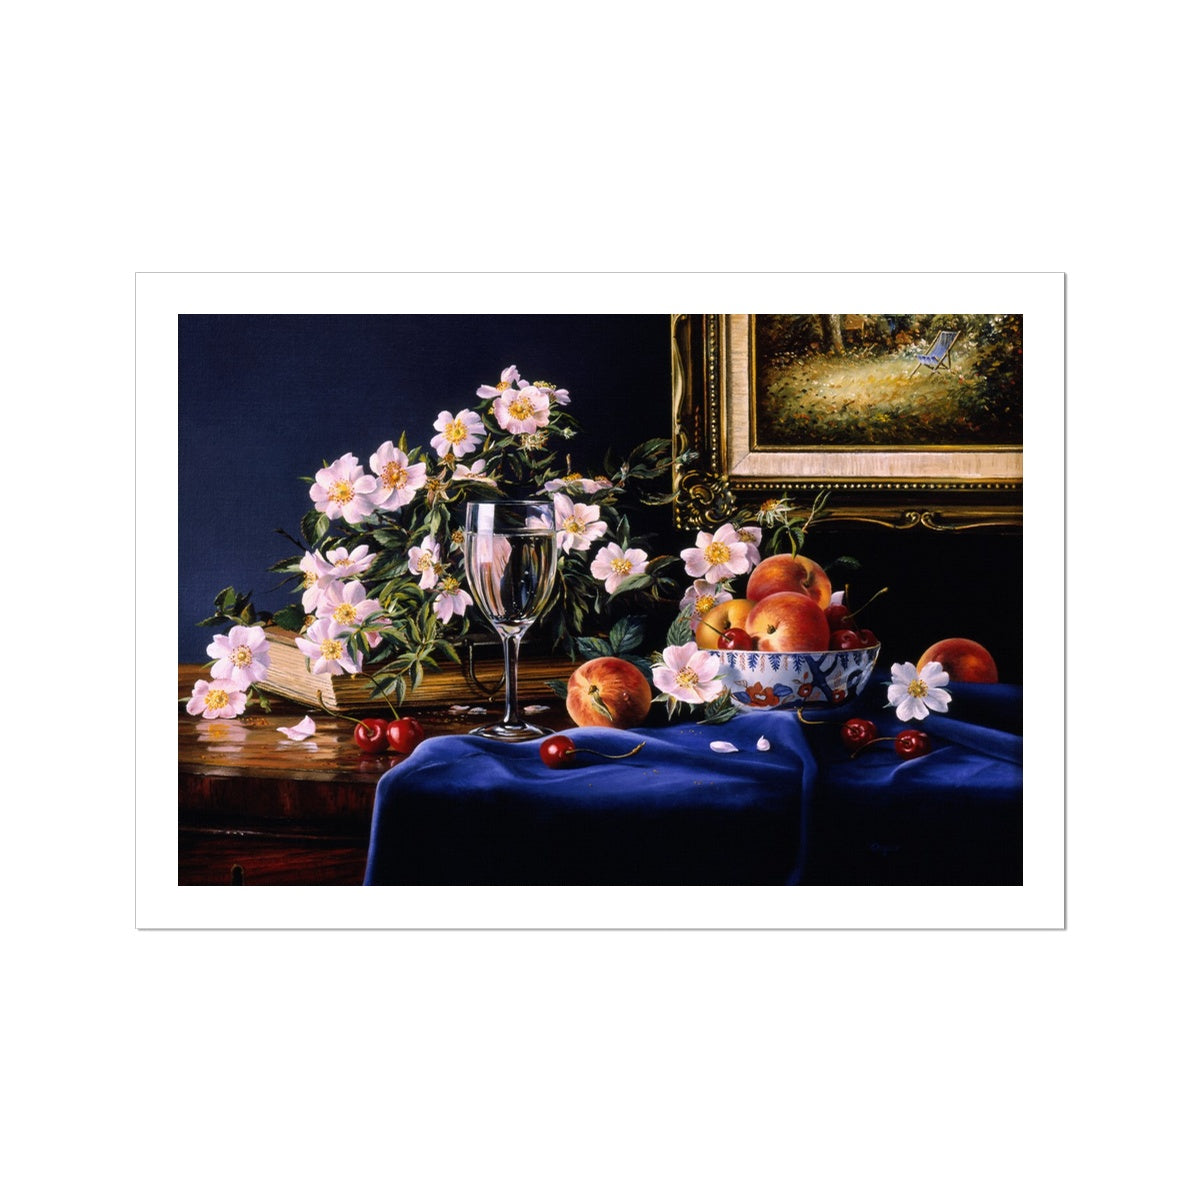 Ted Dyer Fine Art Print. Open Edition Cornish Art Print. 'Dog Roses and Peaches Still Life'. Cornwall Art Gallery